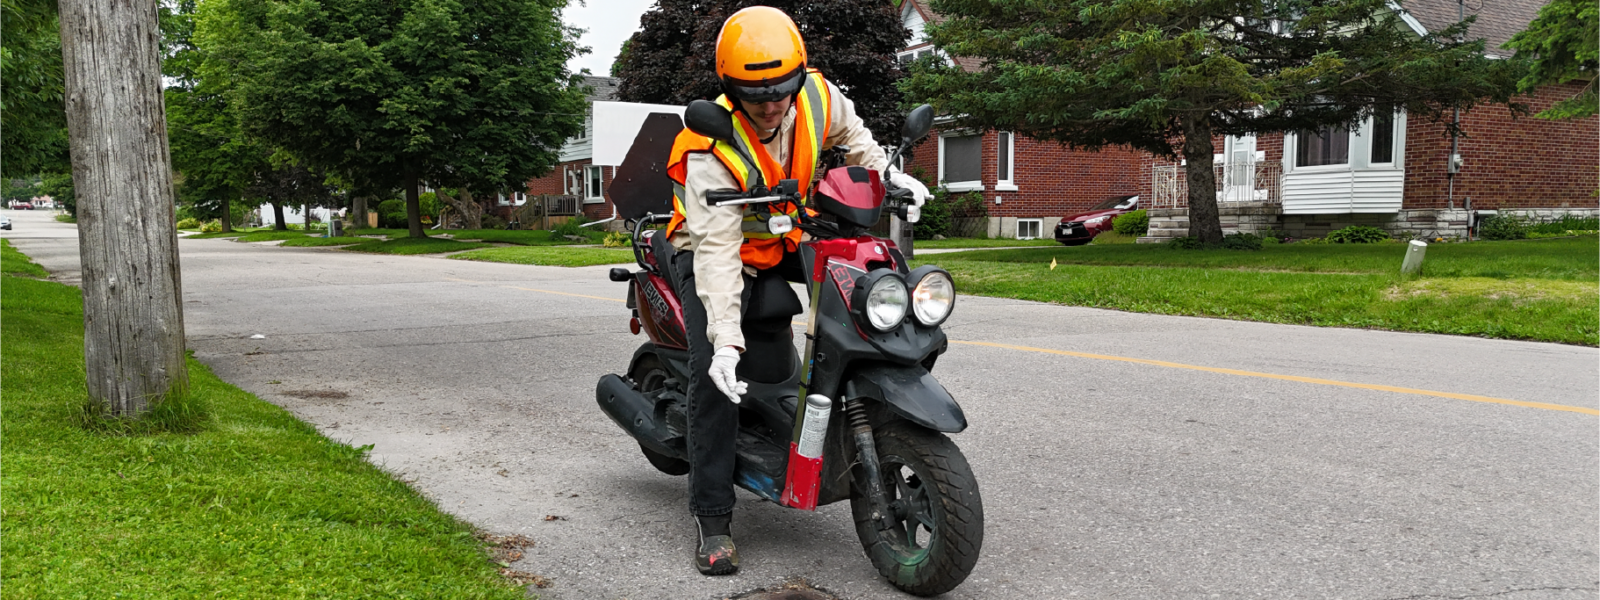 Technician applying larvicide by hand to roadside catch basins while on a motorized scooter.